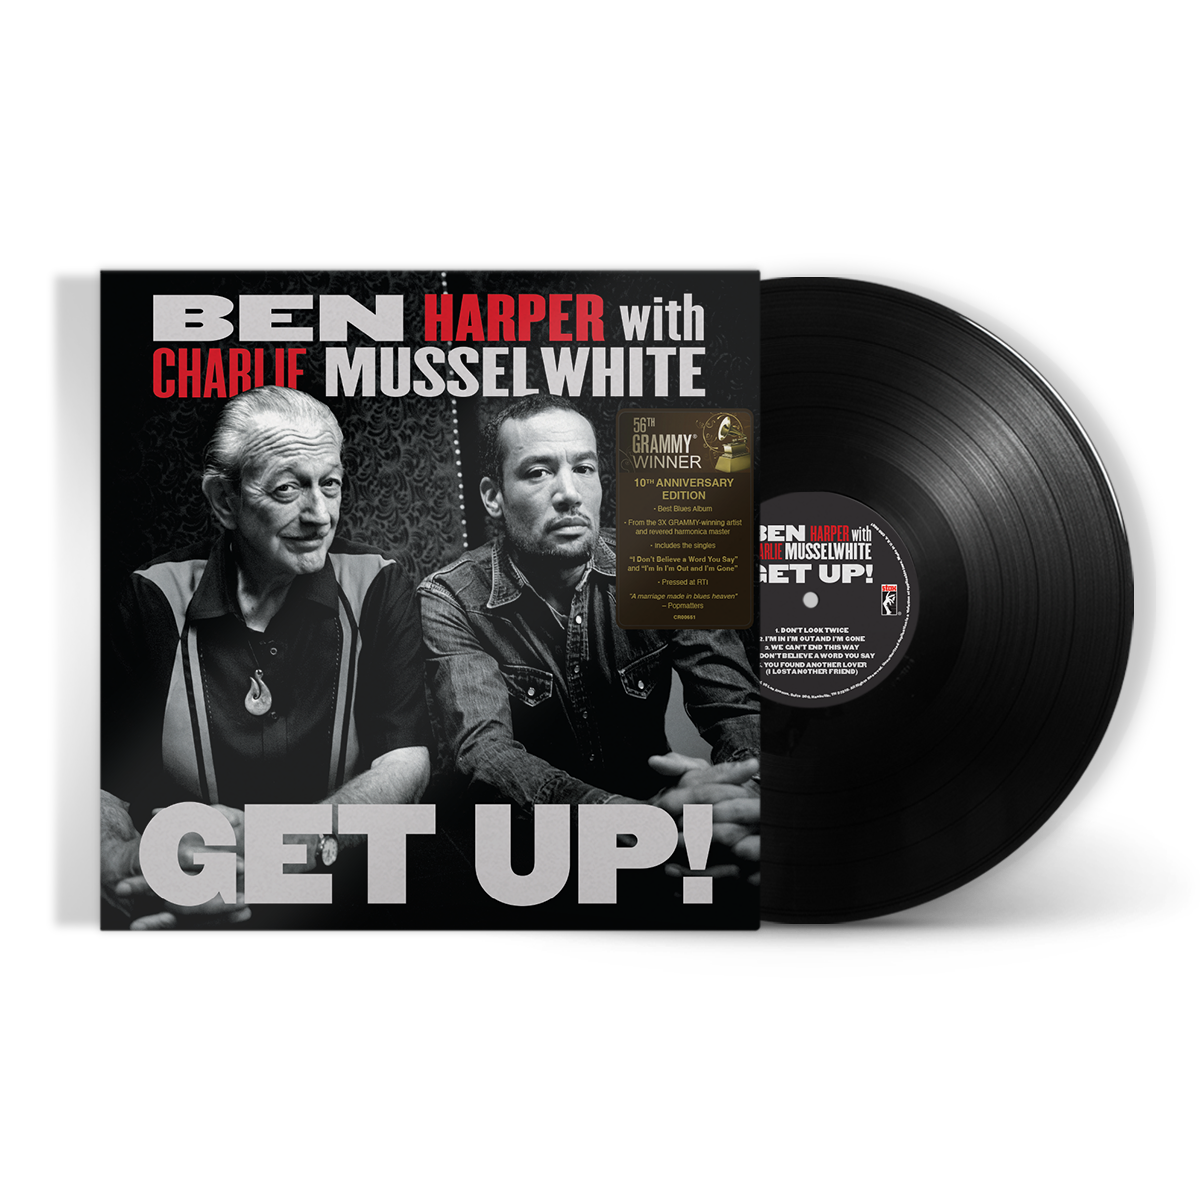 Featured image for “BEN HARPER AND CHARLIE MUSSELWHITE’S GRAMMY®-WINNING GET UP! RETURNS TO VINYL THIS NOVEMBER”